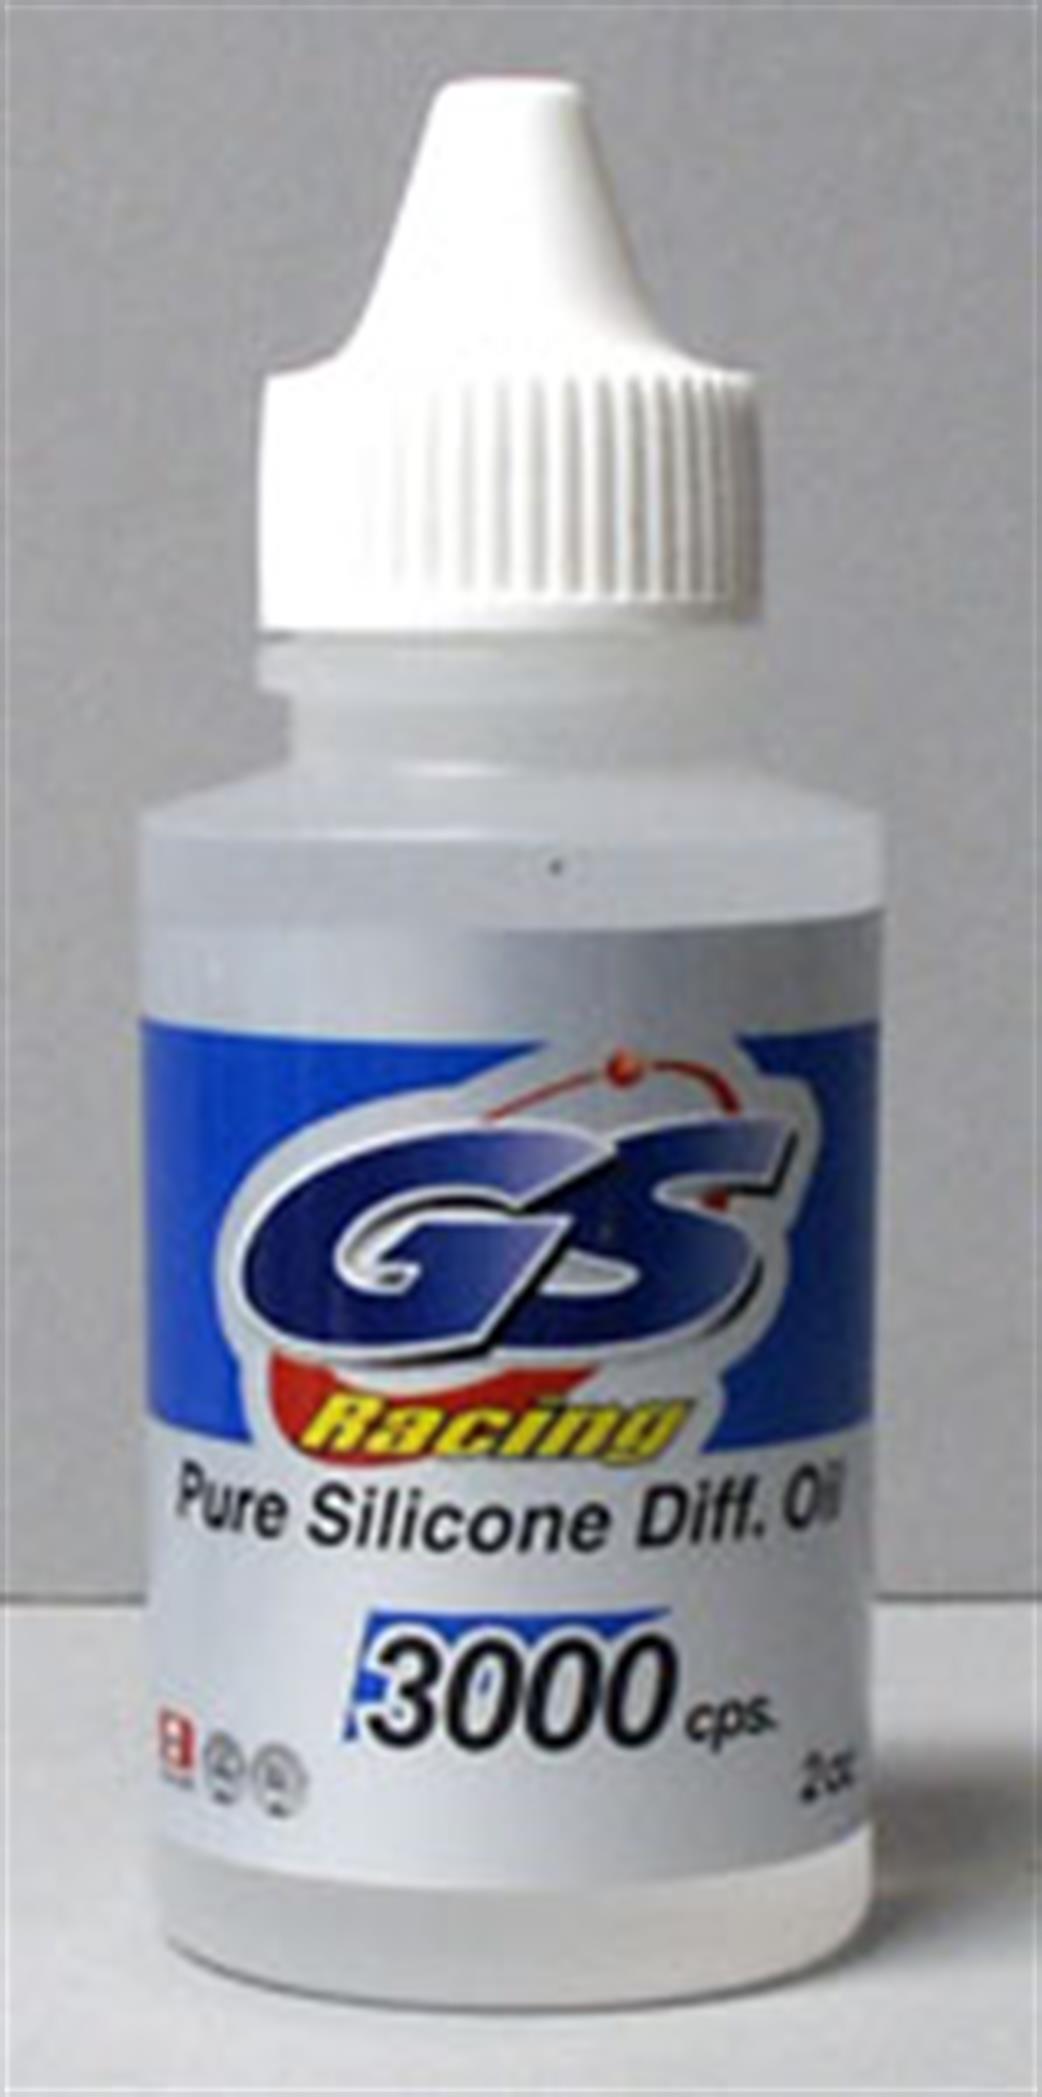 GS Racing GS-70021 Silicon Diff oil 3000cps